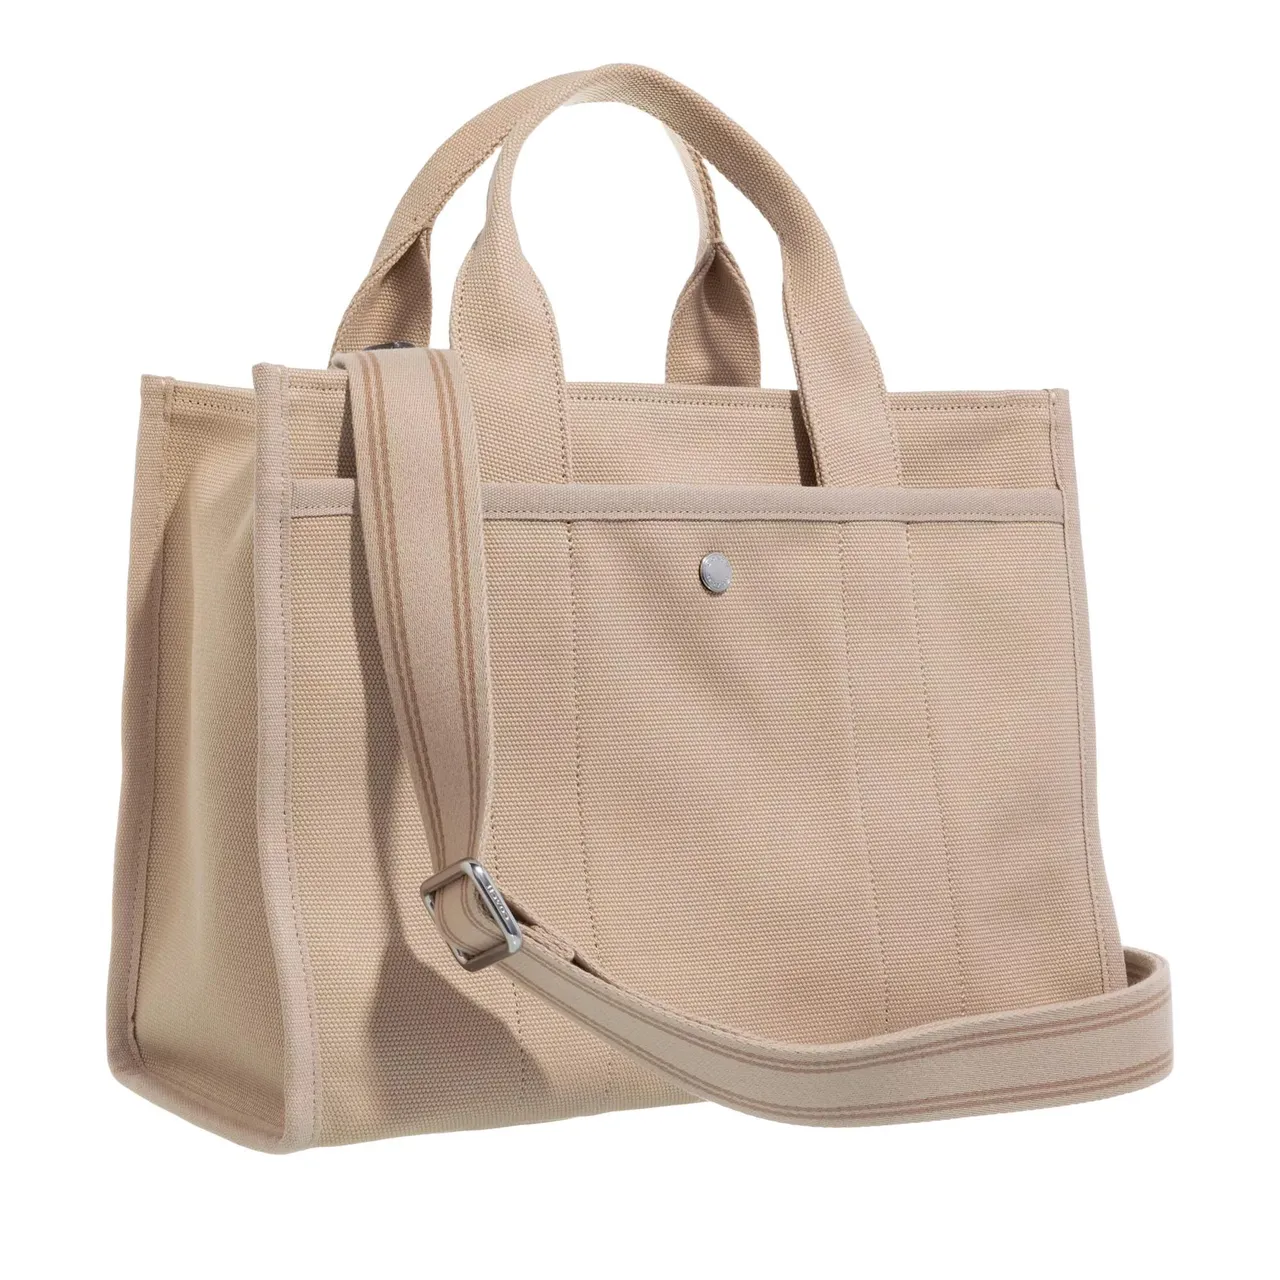 Coach Tote Bags - Cargo Tote - beige - Tote Bags for ladies